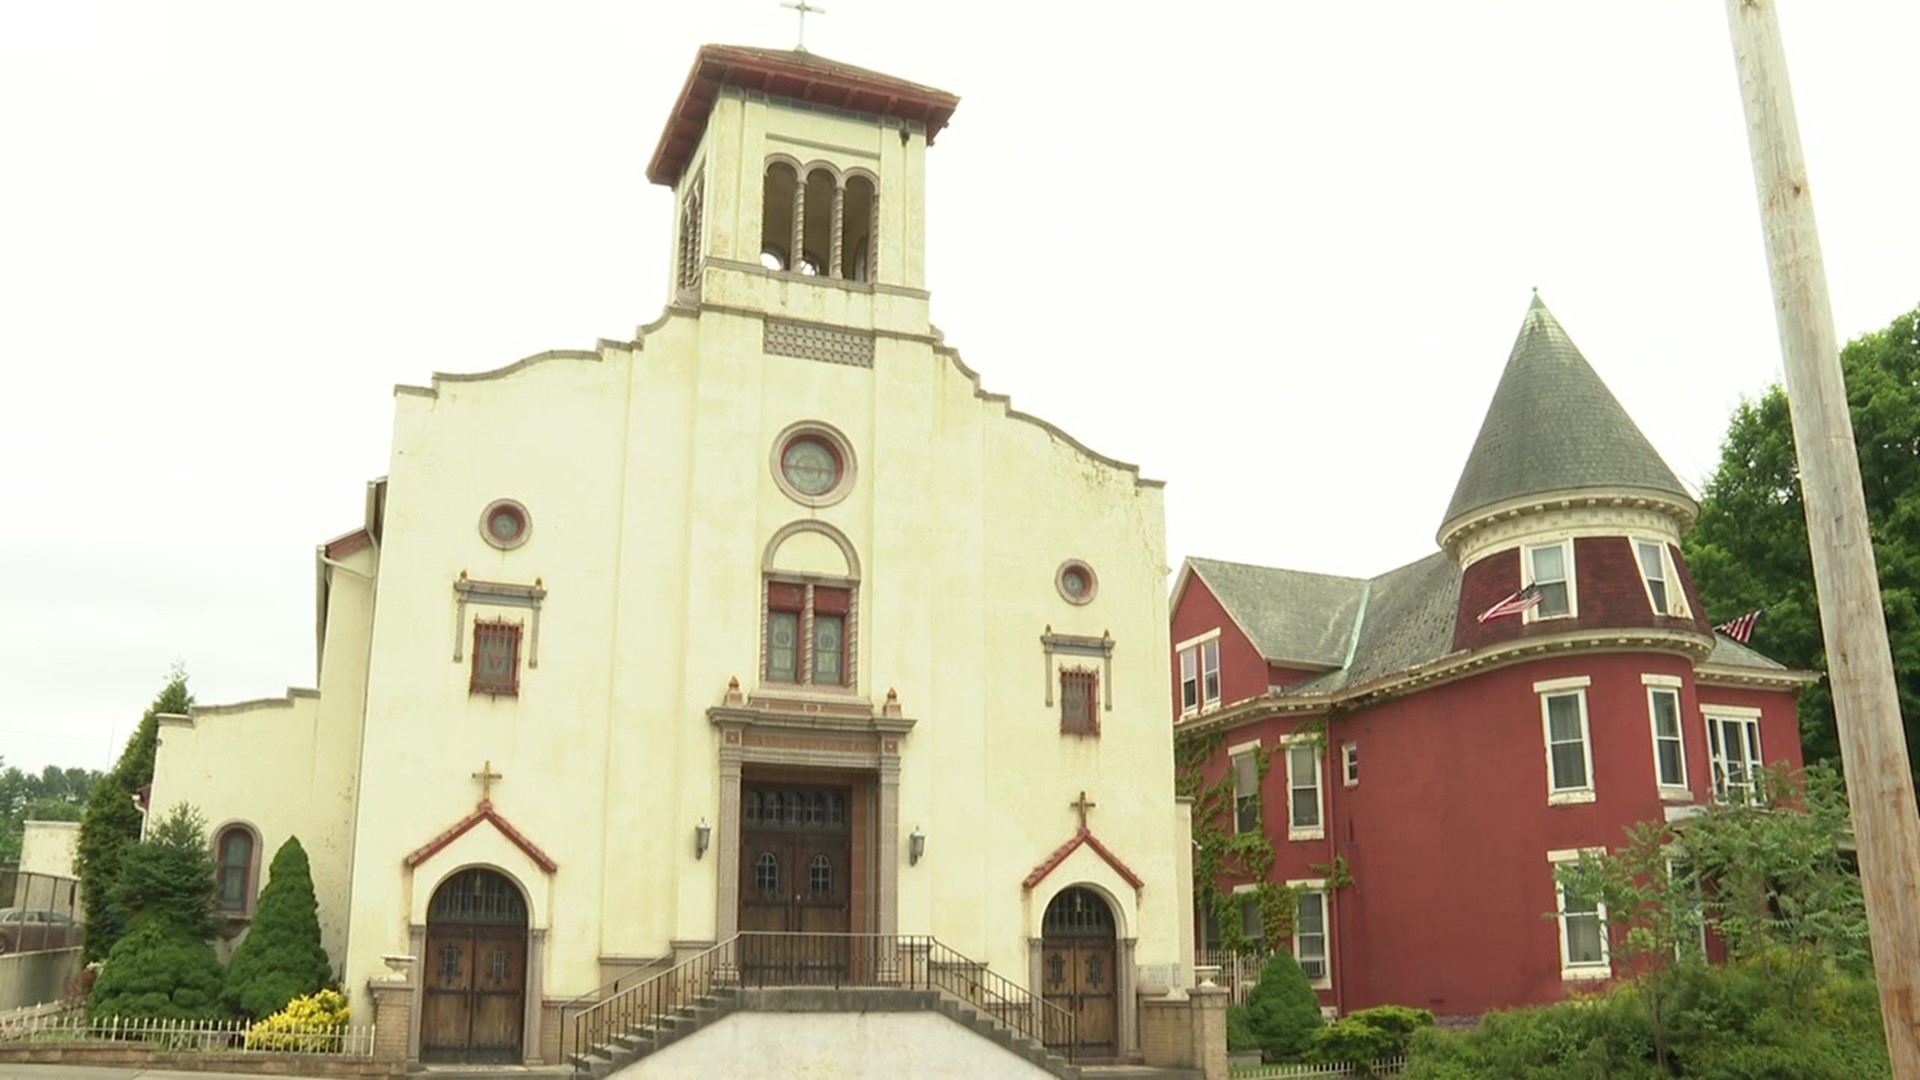 This month, the Diocese of Allentown announced a church building in Schuylkill County would be put up for sale. Former parishioners are pushing back.